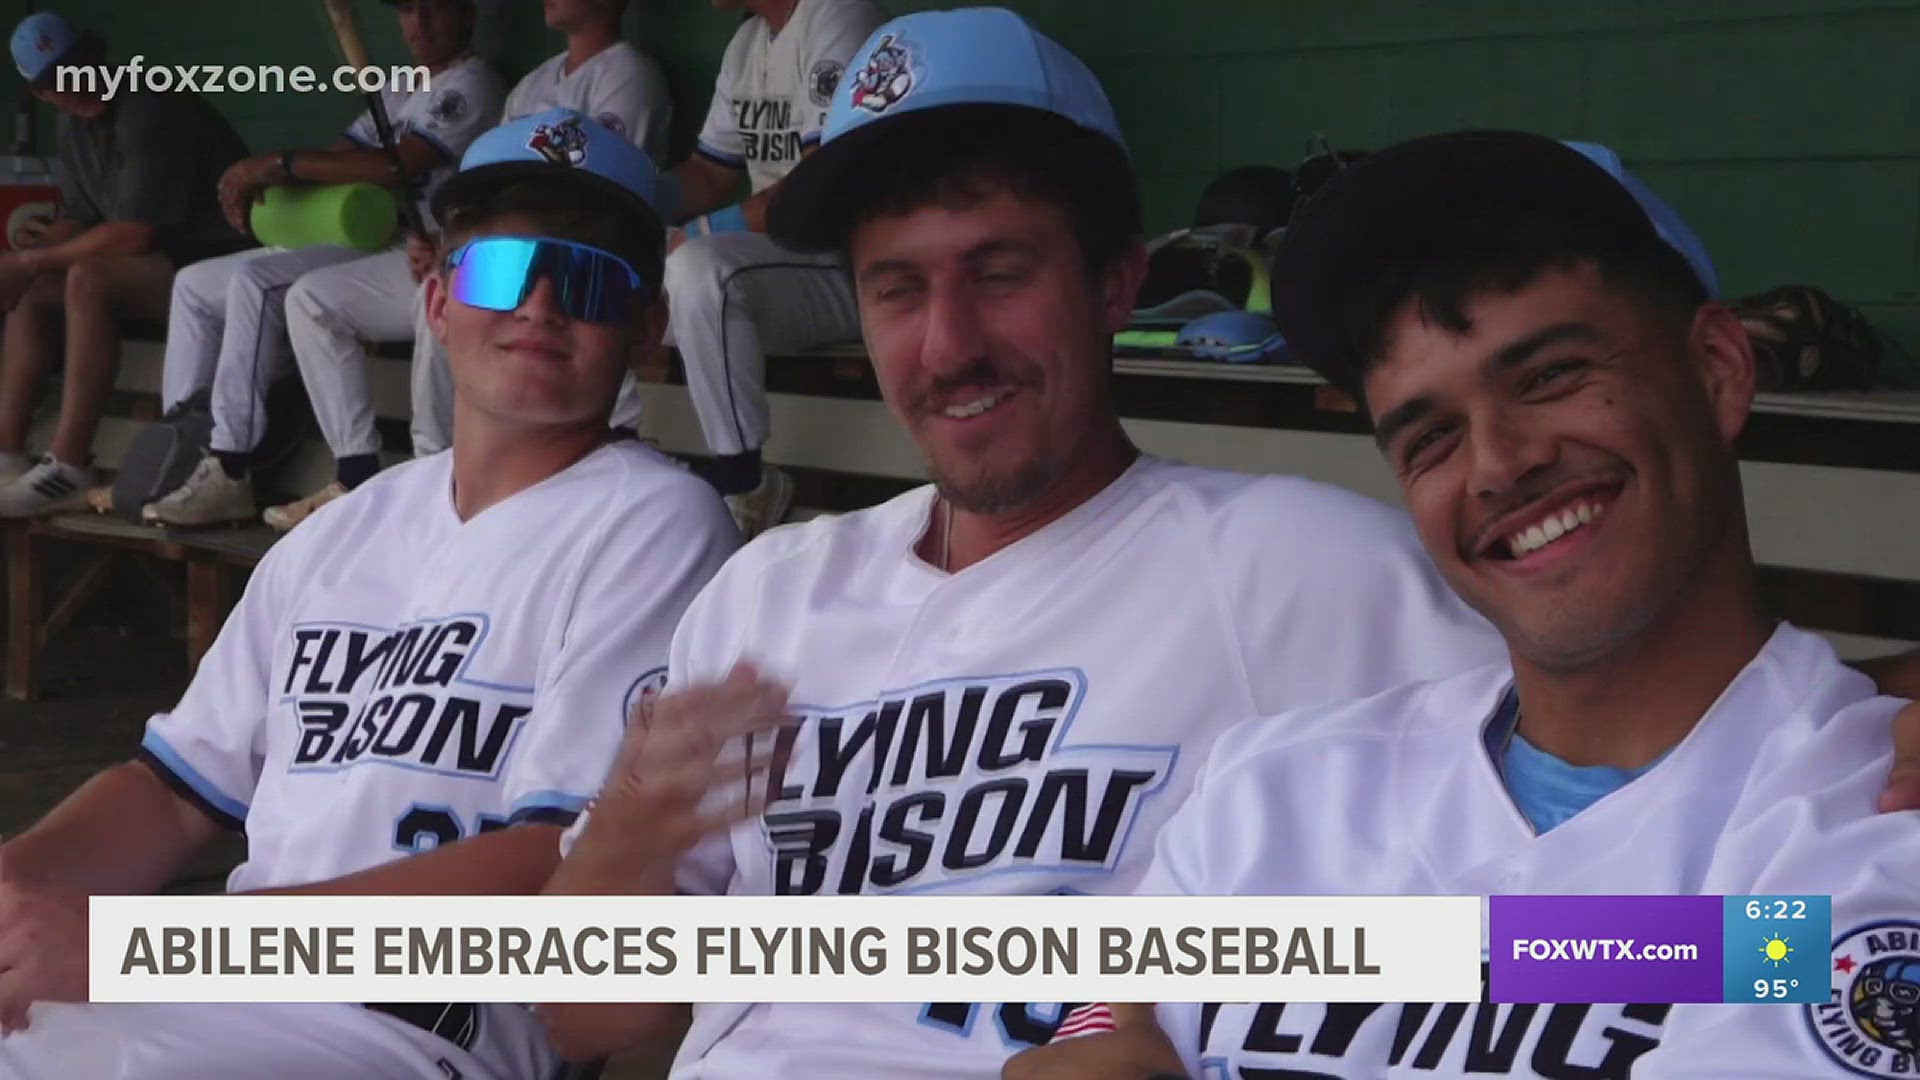 It is year one of Flying Bison baseball, but Abilene locals could not be happier to enjoy their new team.